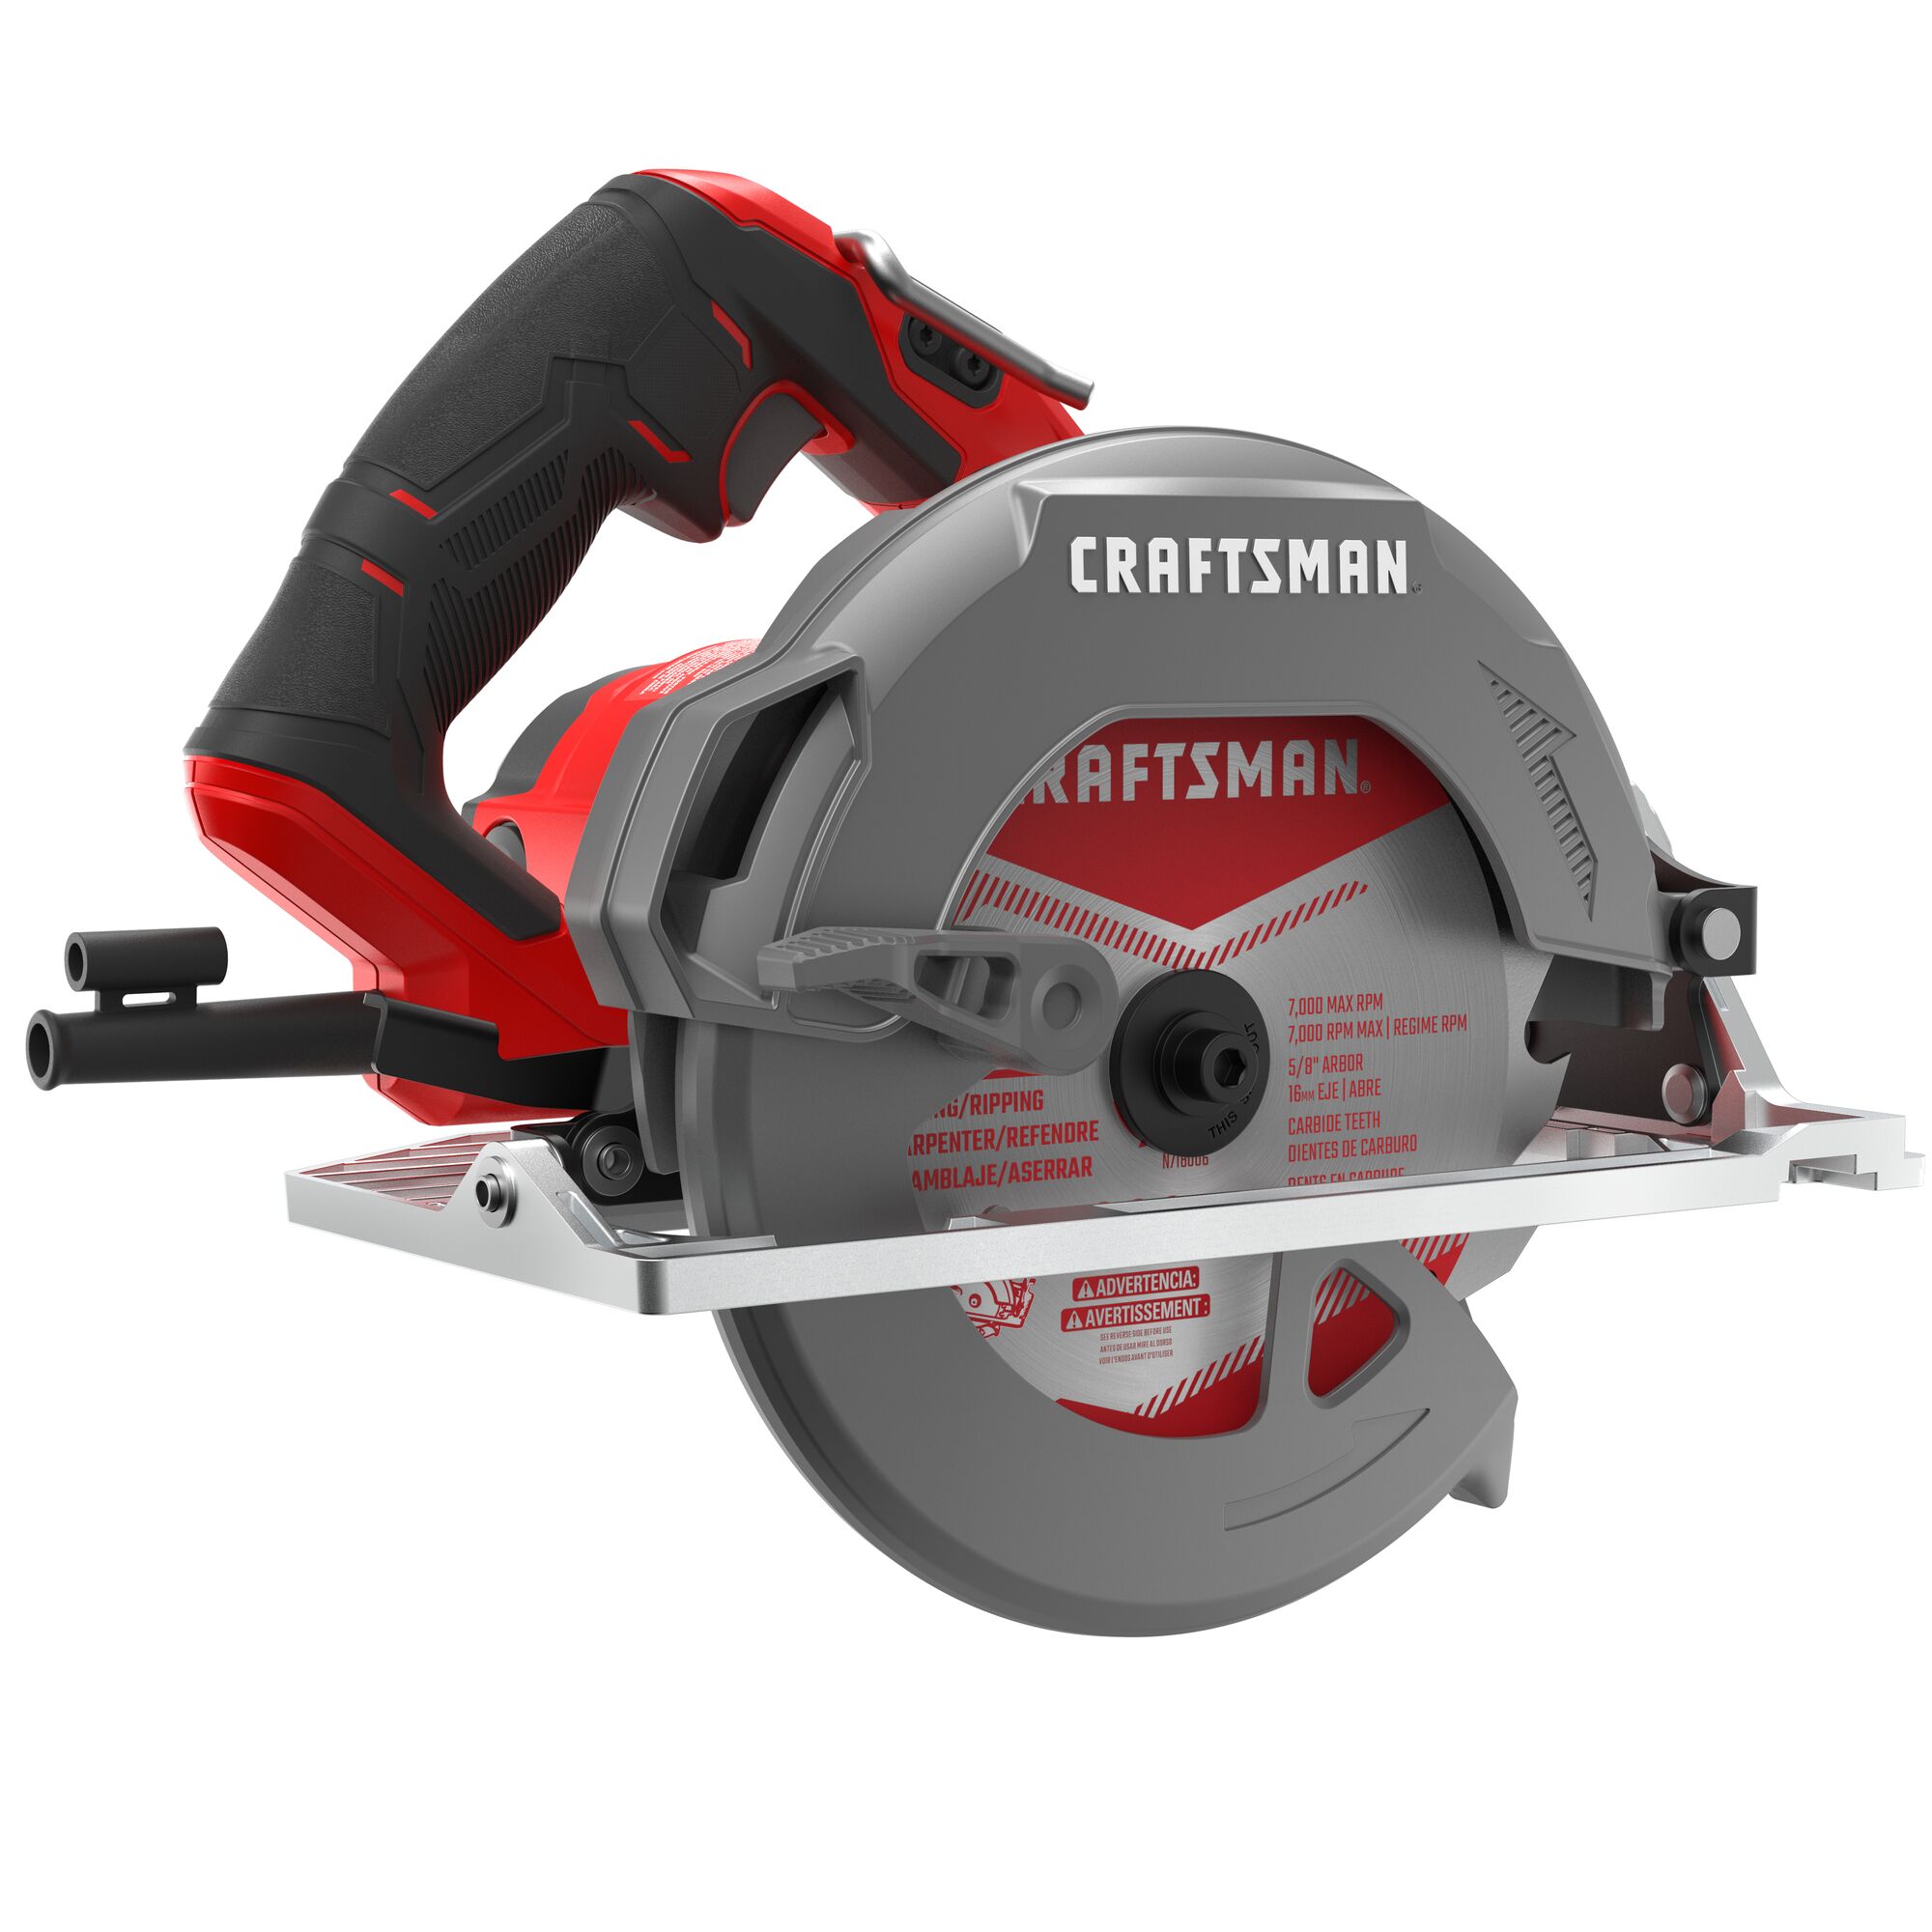 CRAFTSMAN 7-1/4-Inch Circular Saw 15-Amp with Reciprocating Saw CMES510 & CMES300 7.5-Amp